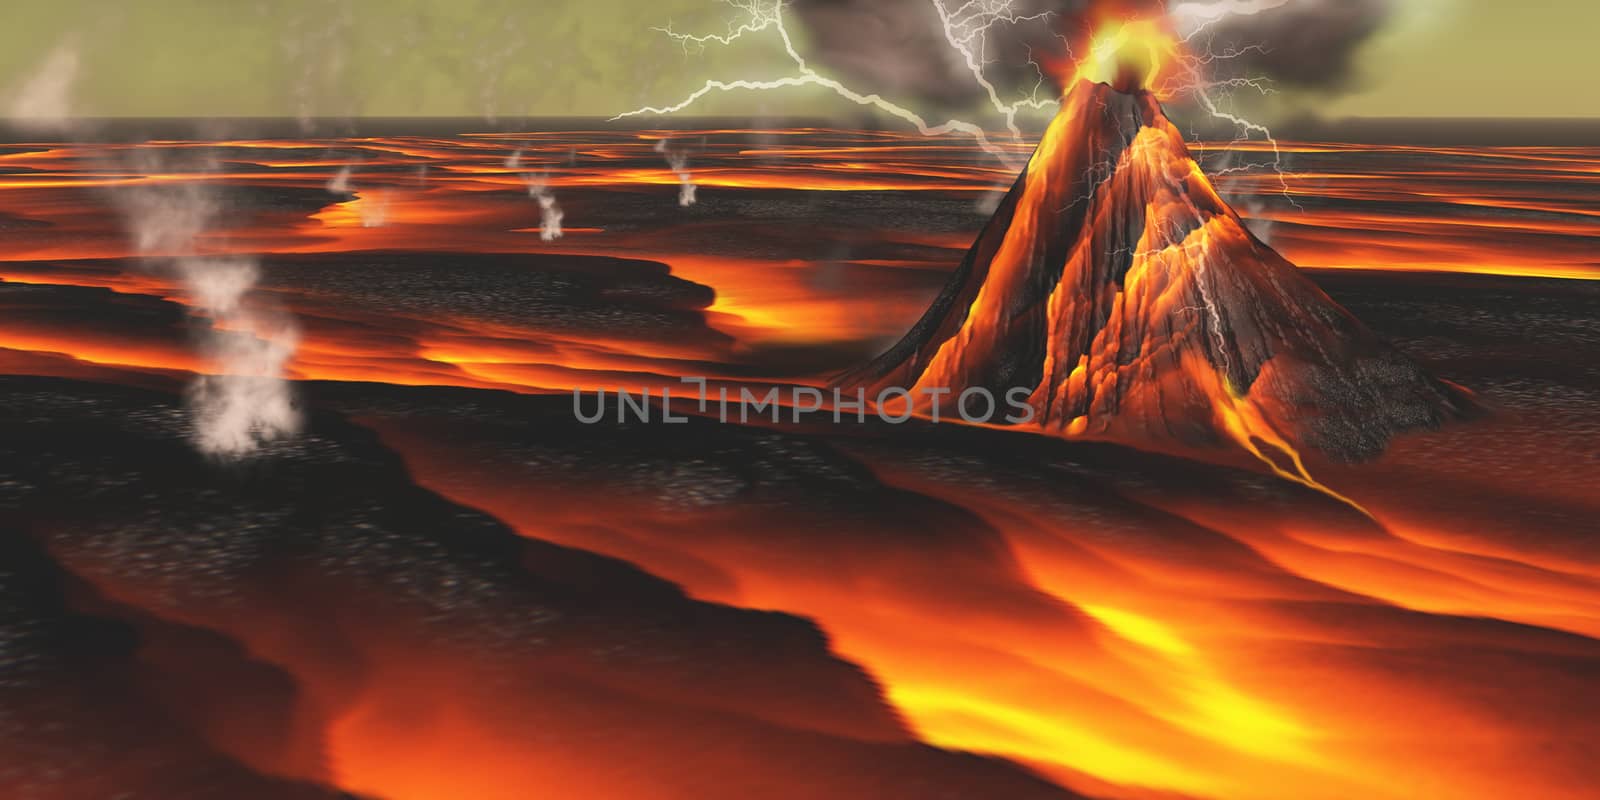 This alien planet has continuous eruptions of its volcanoes with surrounding lava fields and flows.